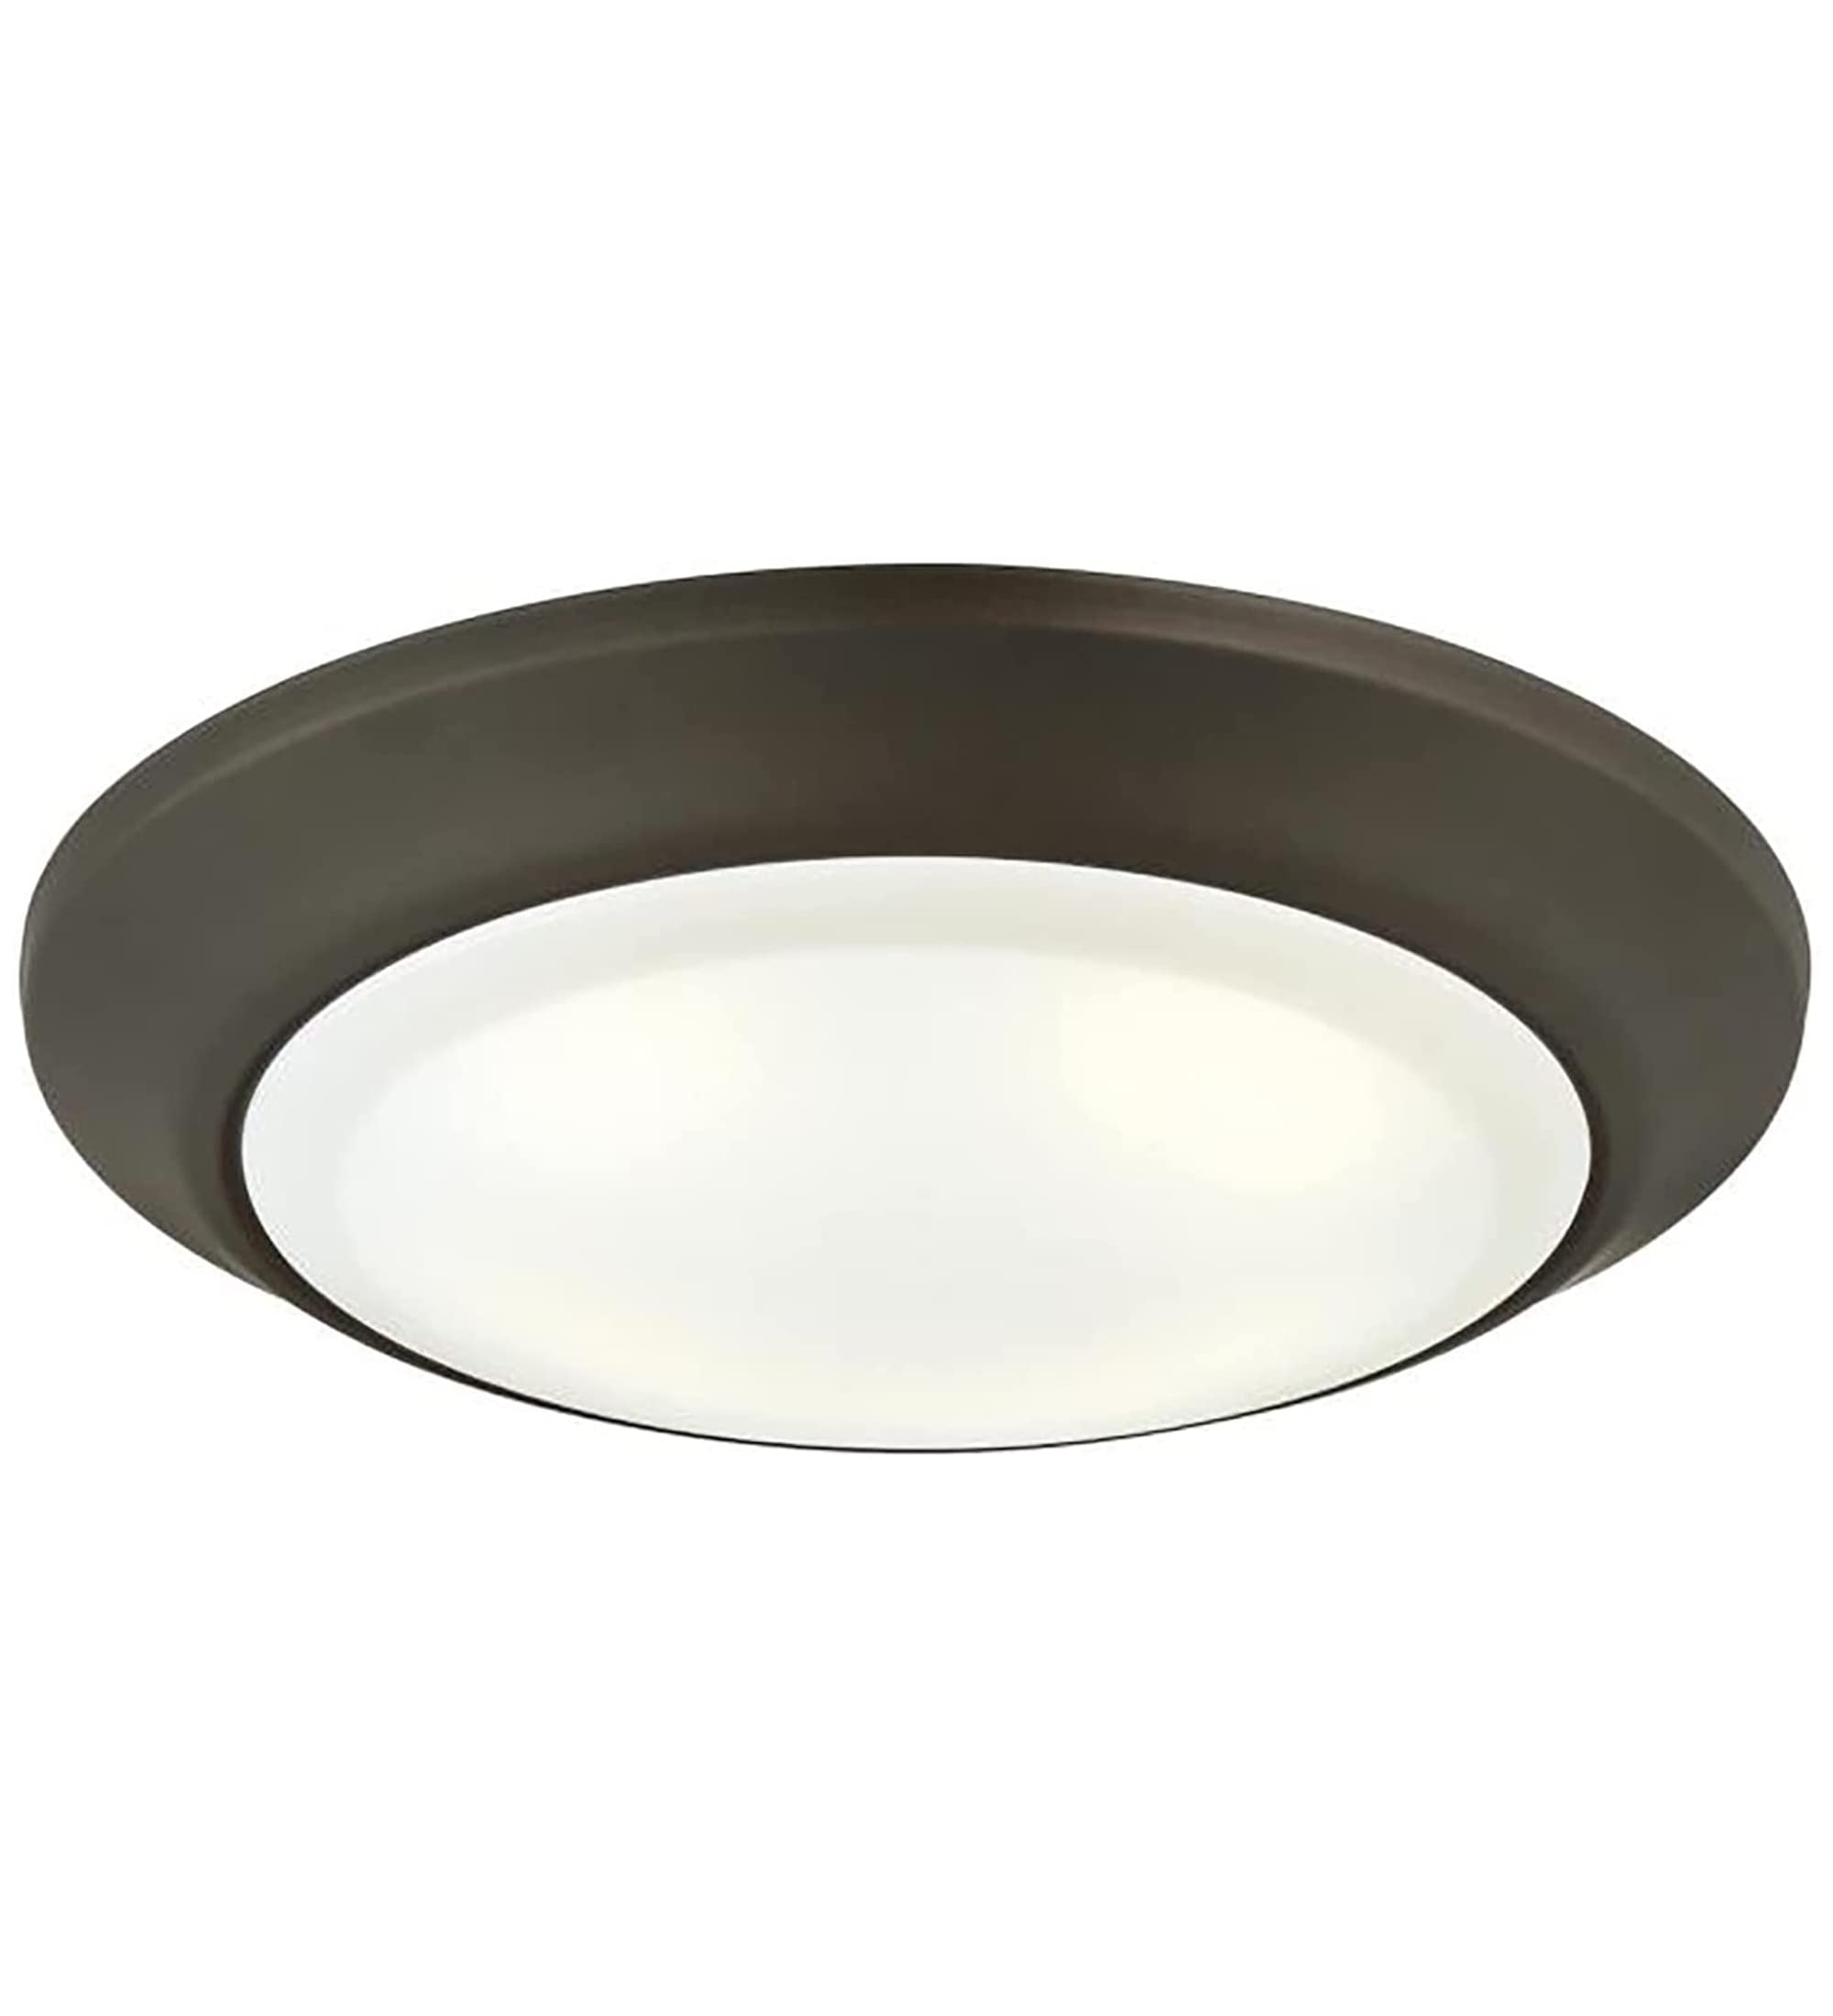 ciata Lighting Round LED Disk Light ceiling Flush Mount, Integrated LED Dimmable, IndoorOutdoor, Energy Saving, Frosted Lens, 15